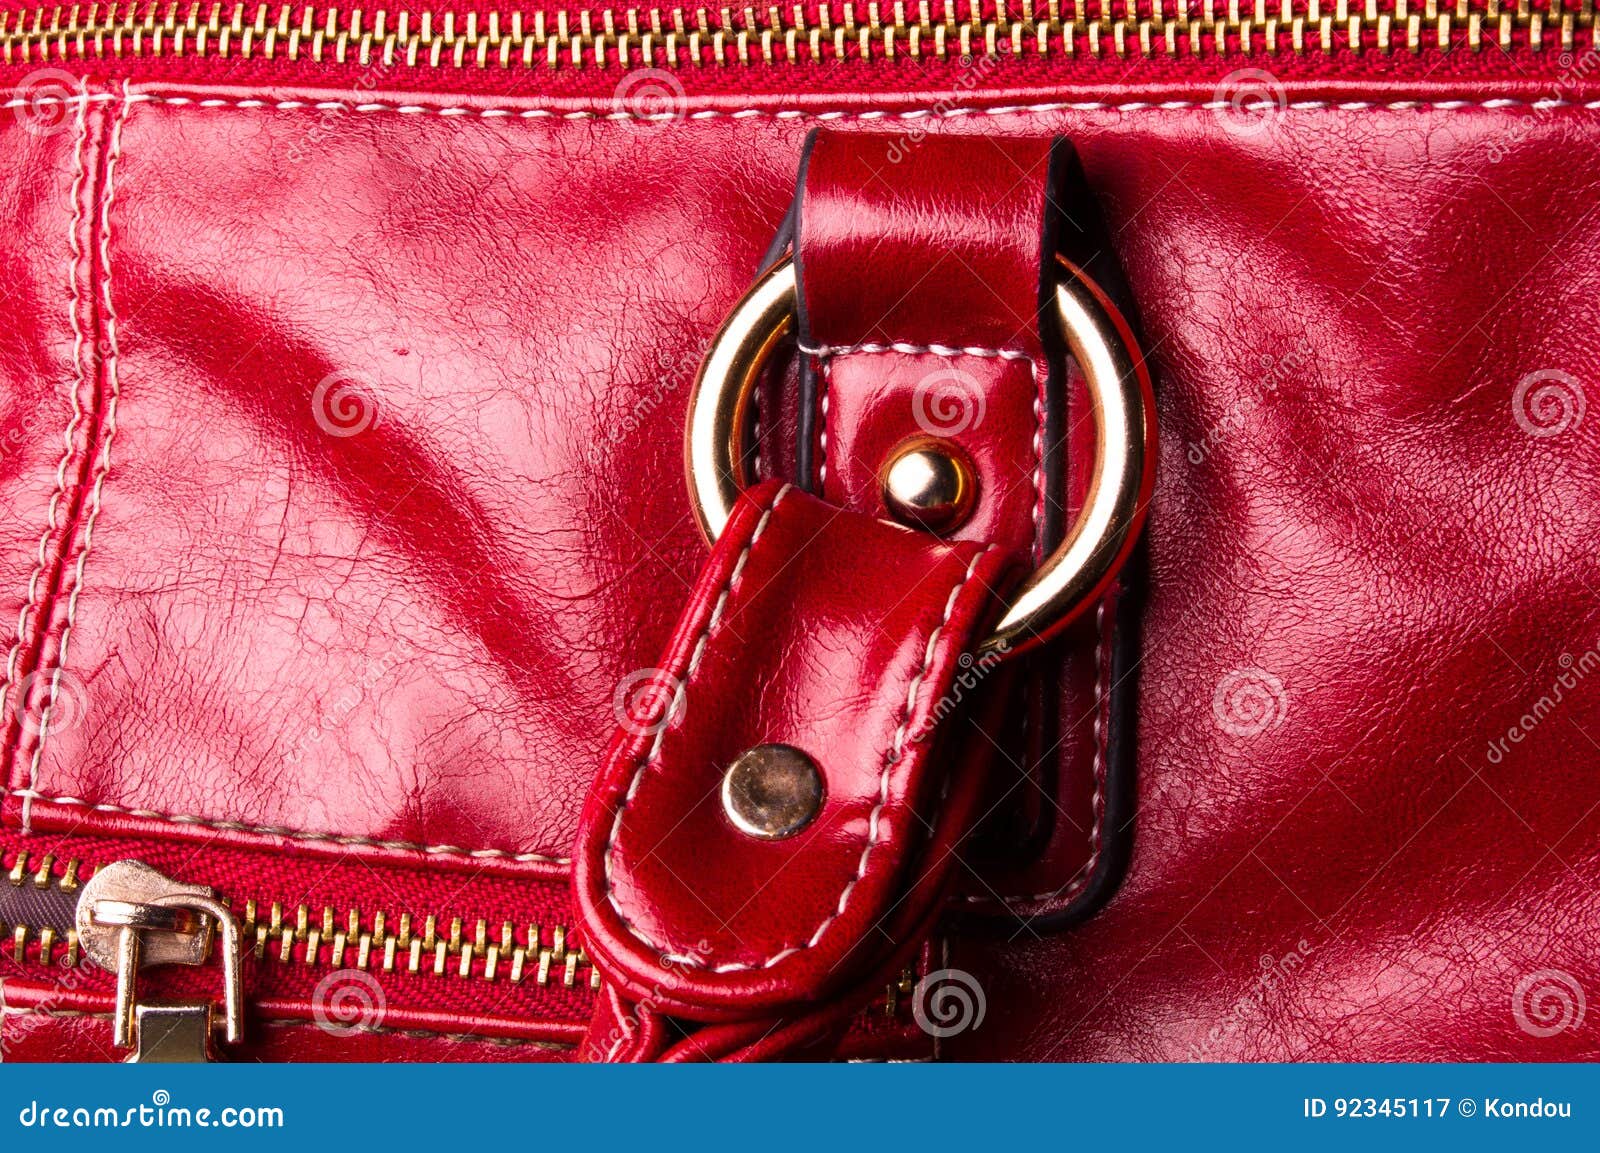 Fittings on the Leather Hand Bag Stock Image - Image of black, pockets ...